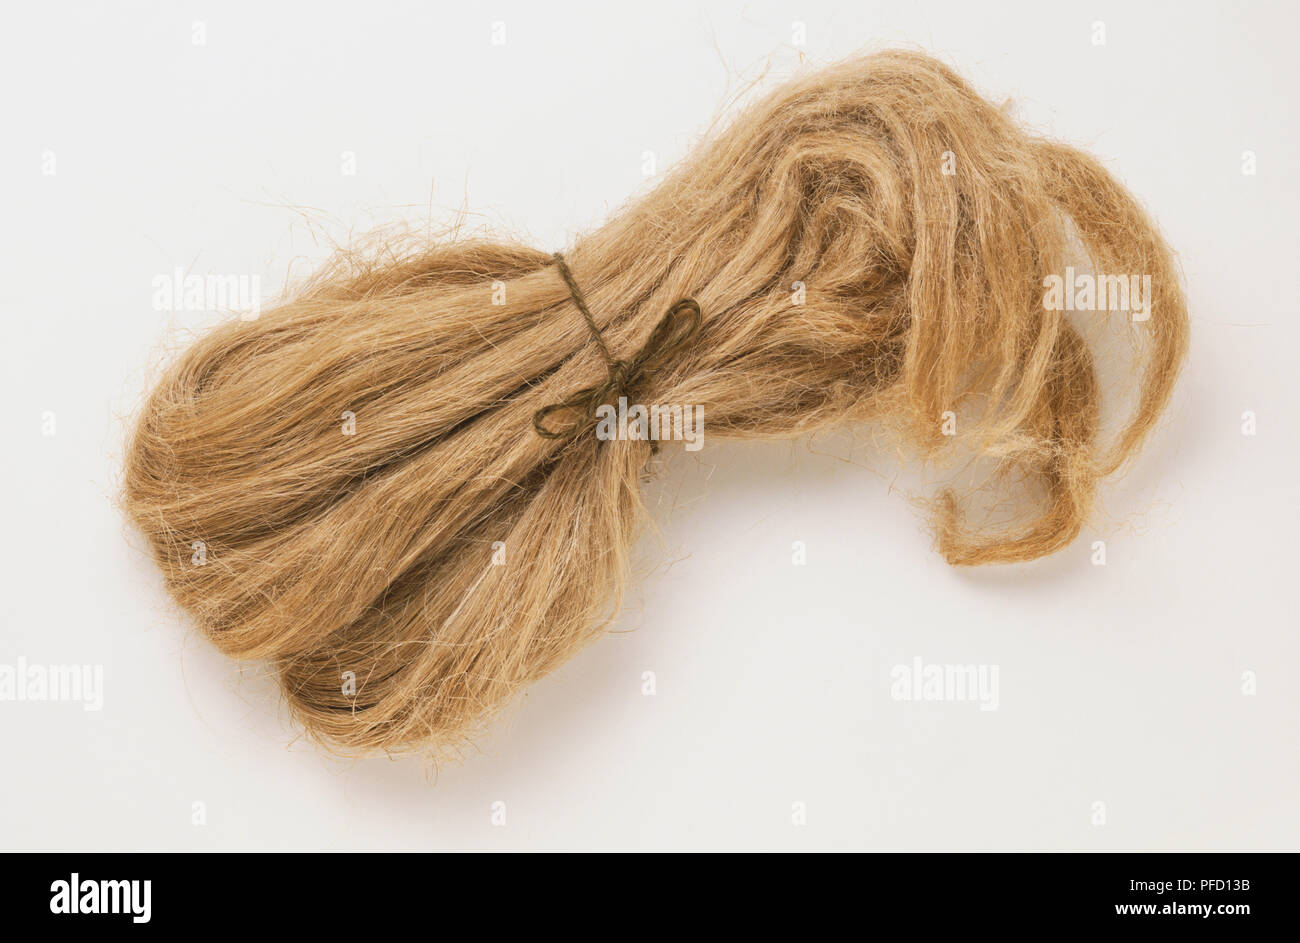 Flax fibres tied in a spool, close up. Stock Photo